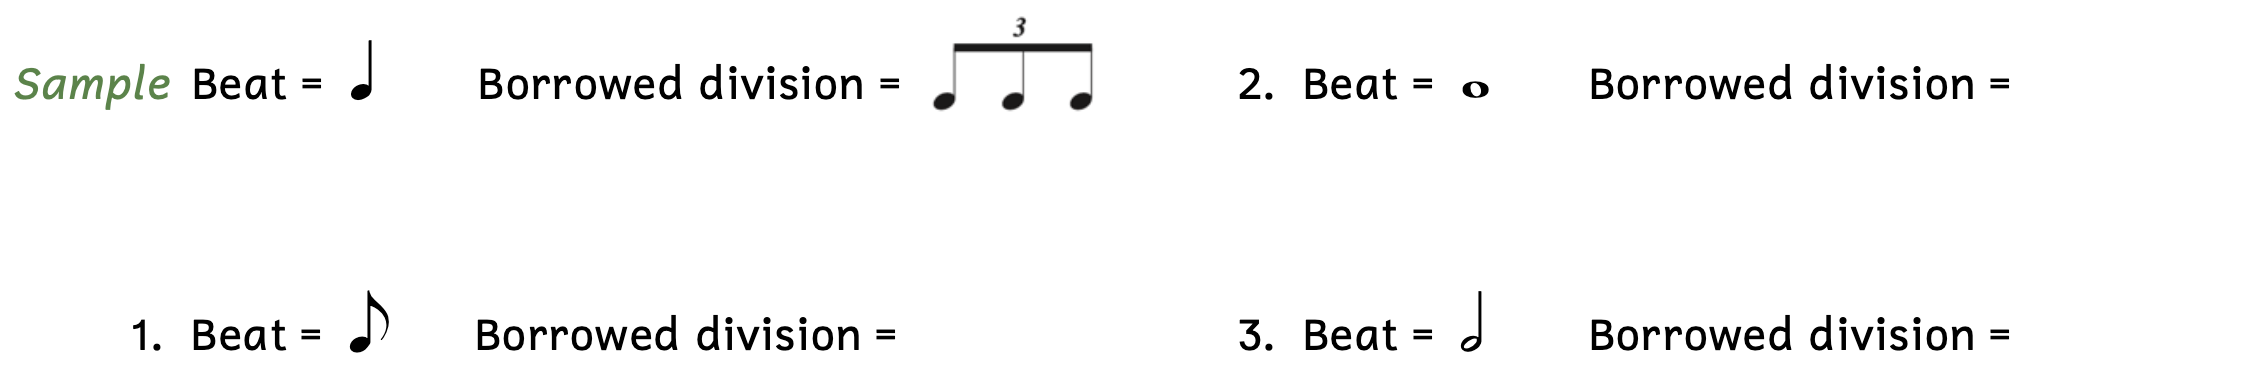 Exercise writing the borrowed division (triplet). Number 1 gives the beat of an eighth note. Number 2 gives the beat of a whole note. Number 3 gives the beat of a half note.